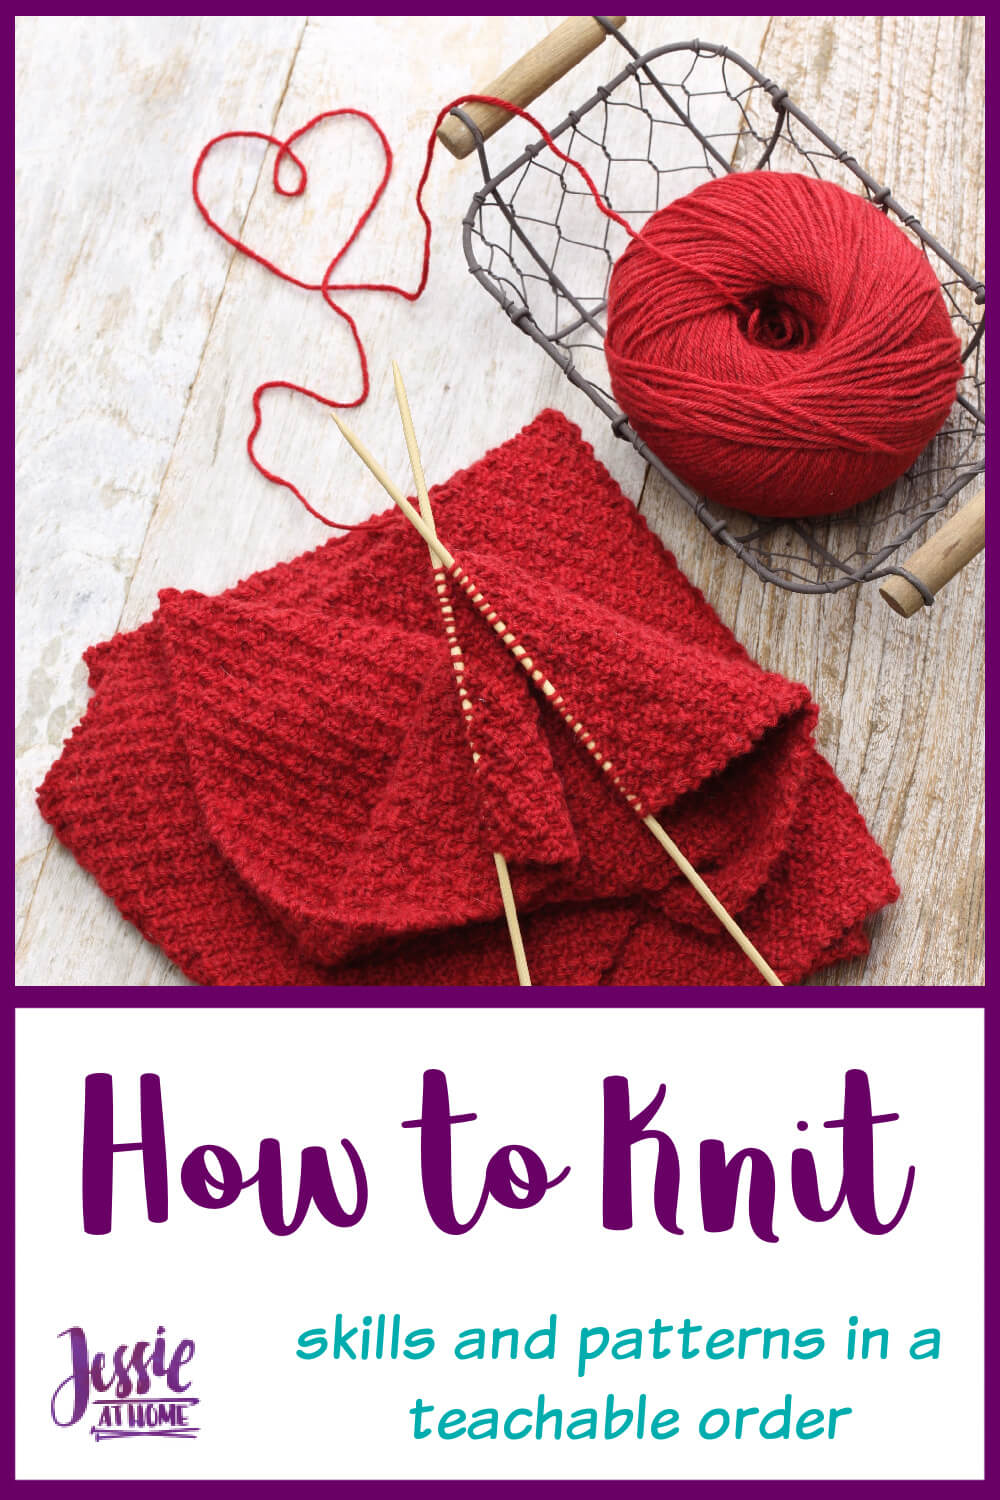 How to Knit - Skills and patterns in a teachable order!